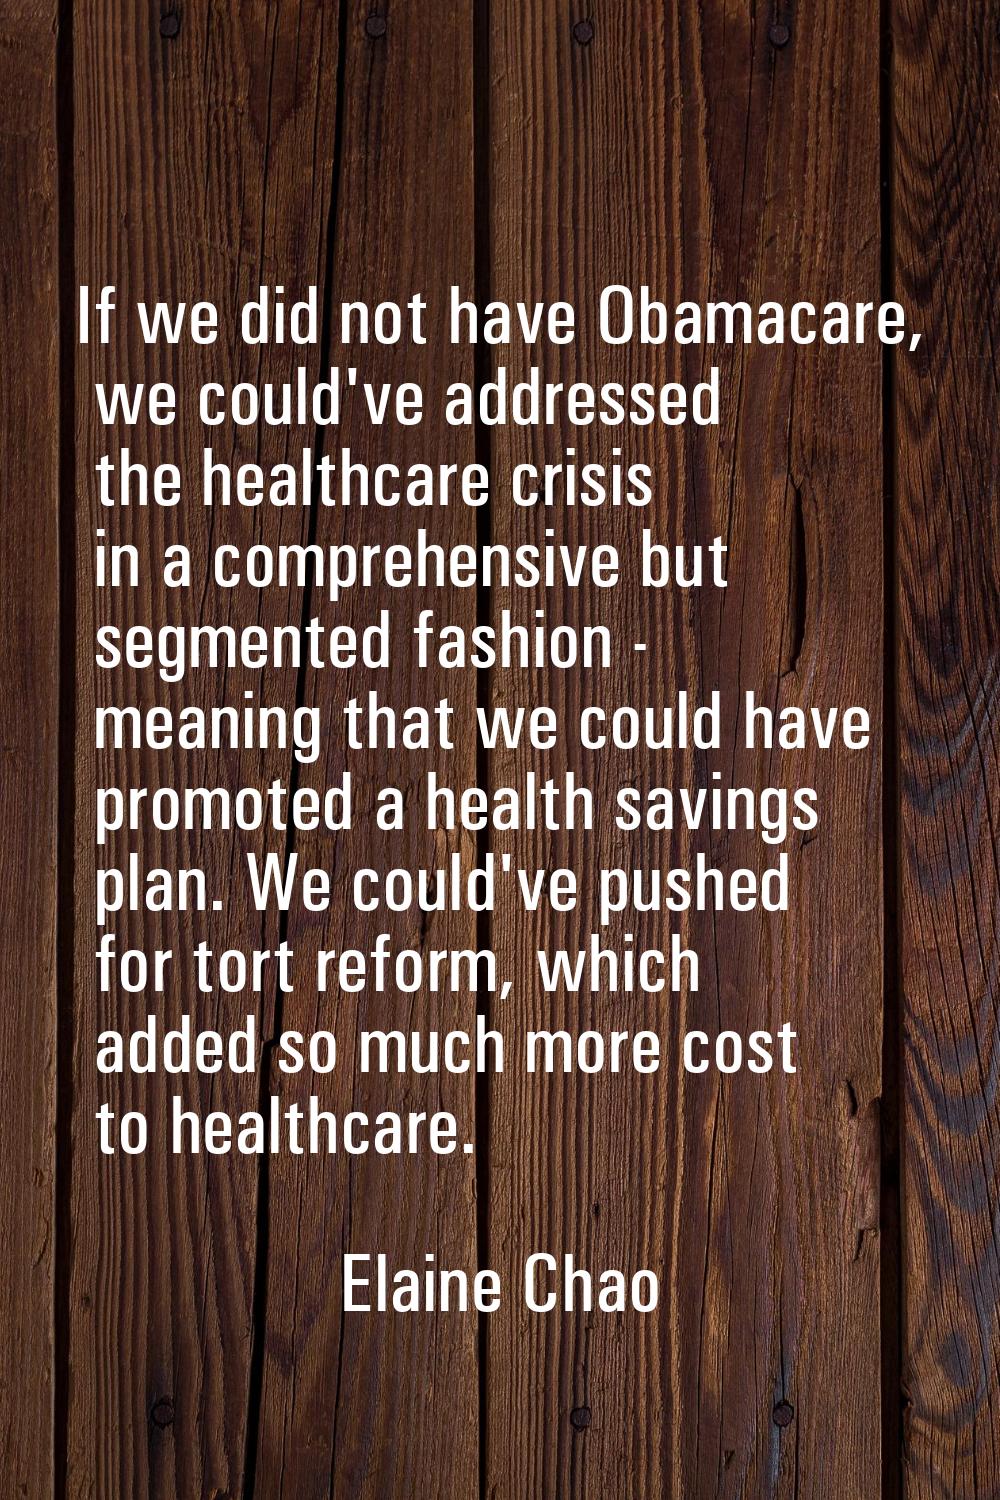 If we did not have Obamacare, we could've addressed the healthcare crisis in a comprehensive but se